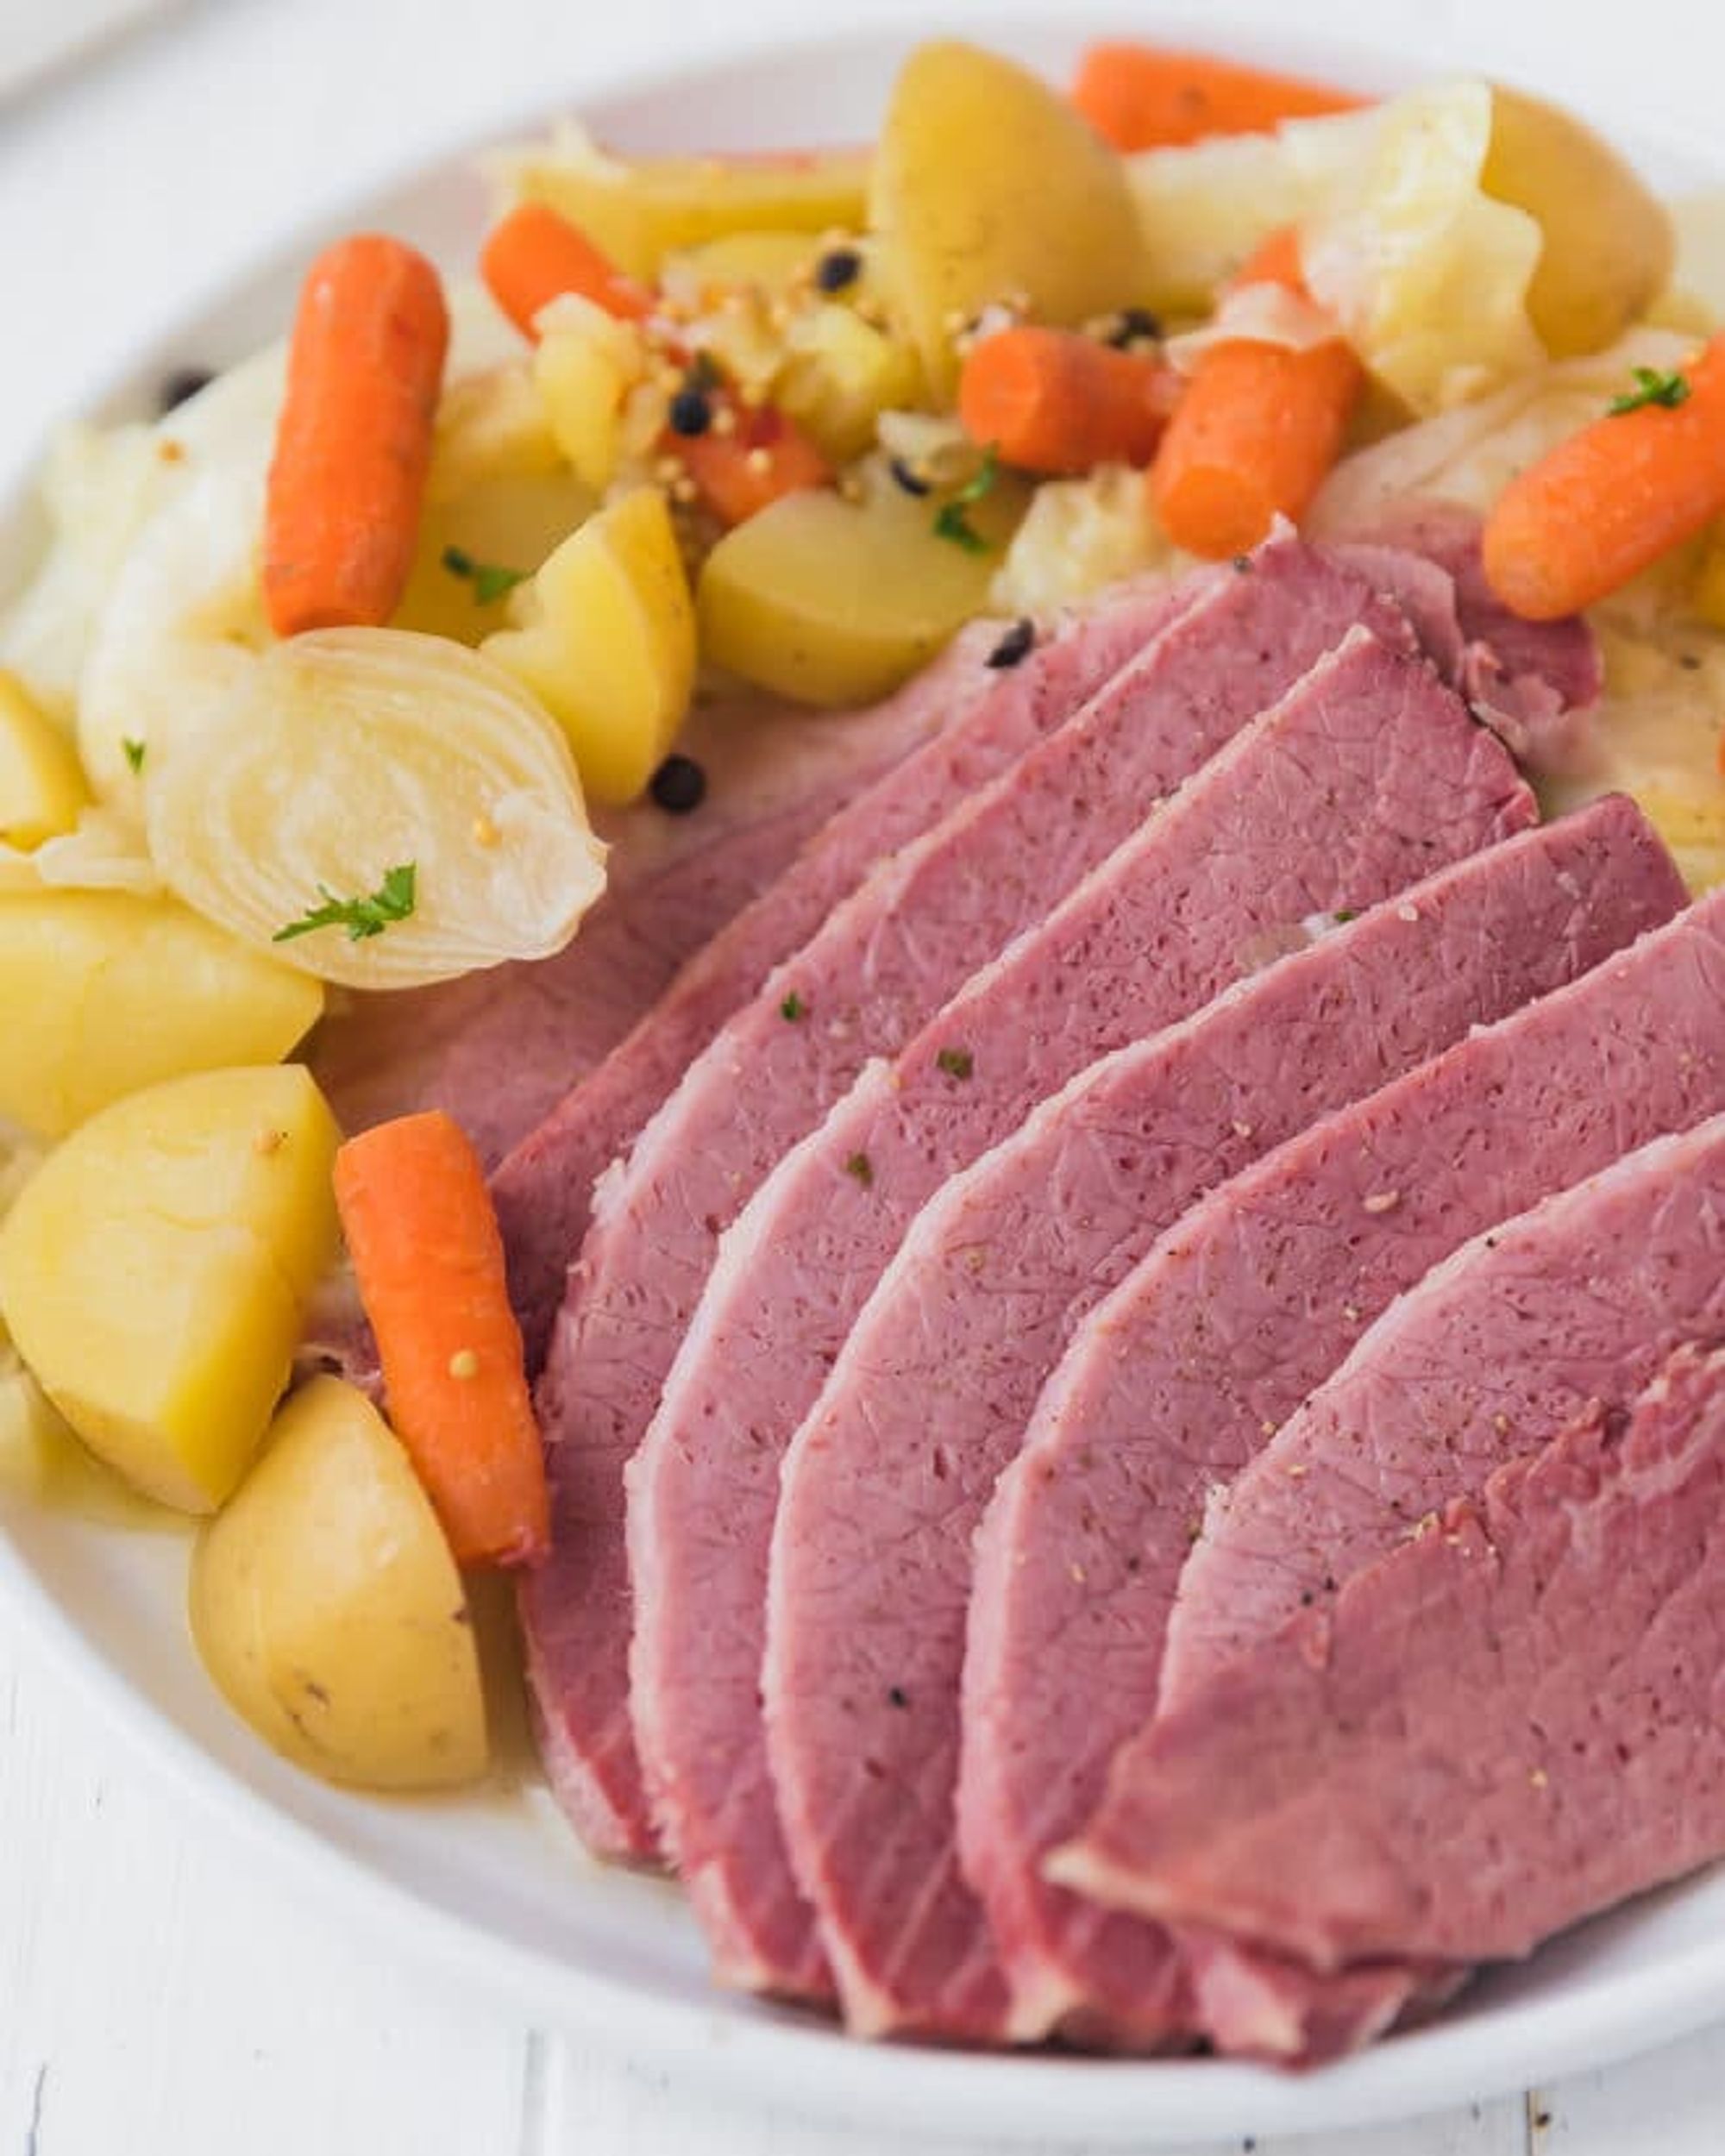 corned-beef-and-cabbage-recipe-cooking-lsl-my-recipe-magic